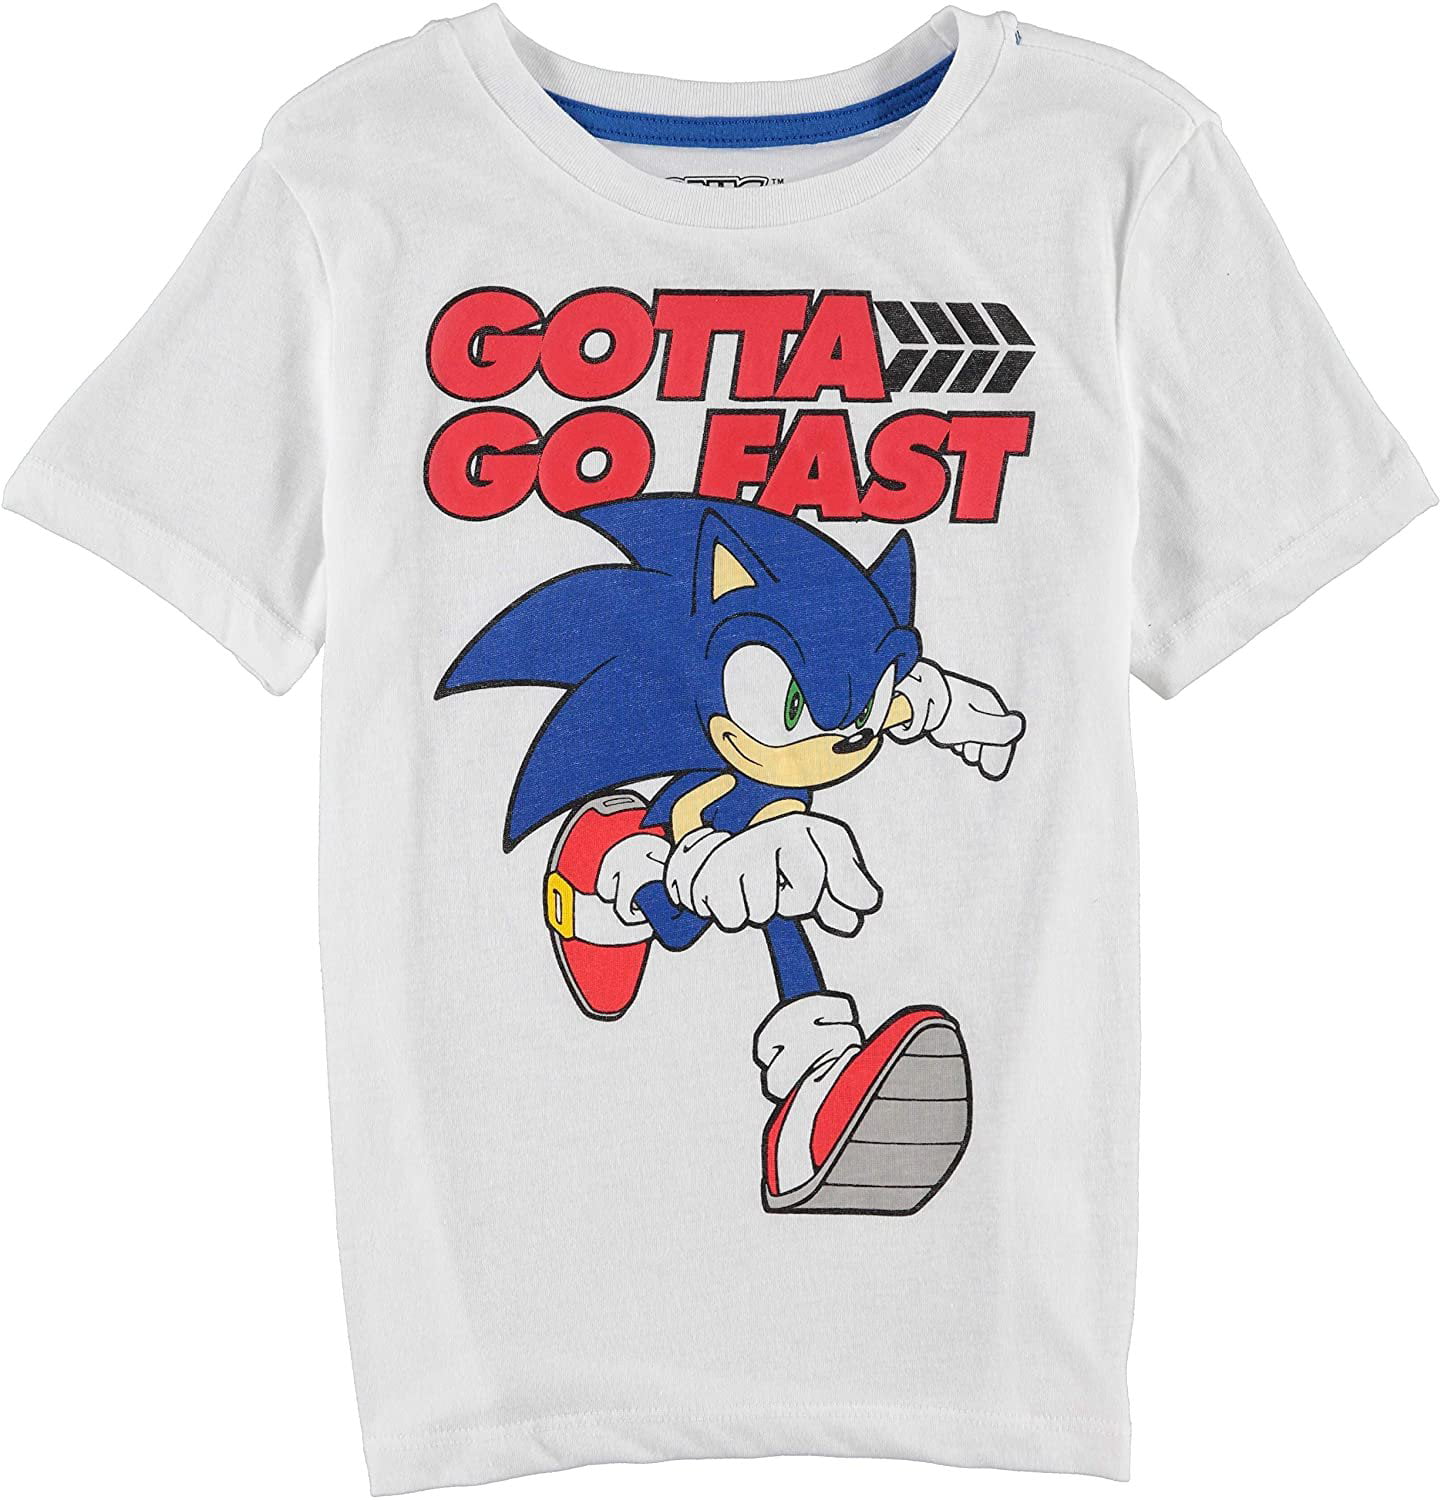 Sonic The Hedgehog Boys Graphic Hoodie 4-5, Navy 10-12, Navy Top and Jogger Pants 3-Piece Outfit Set